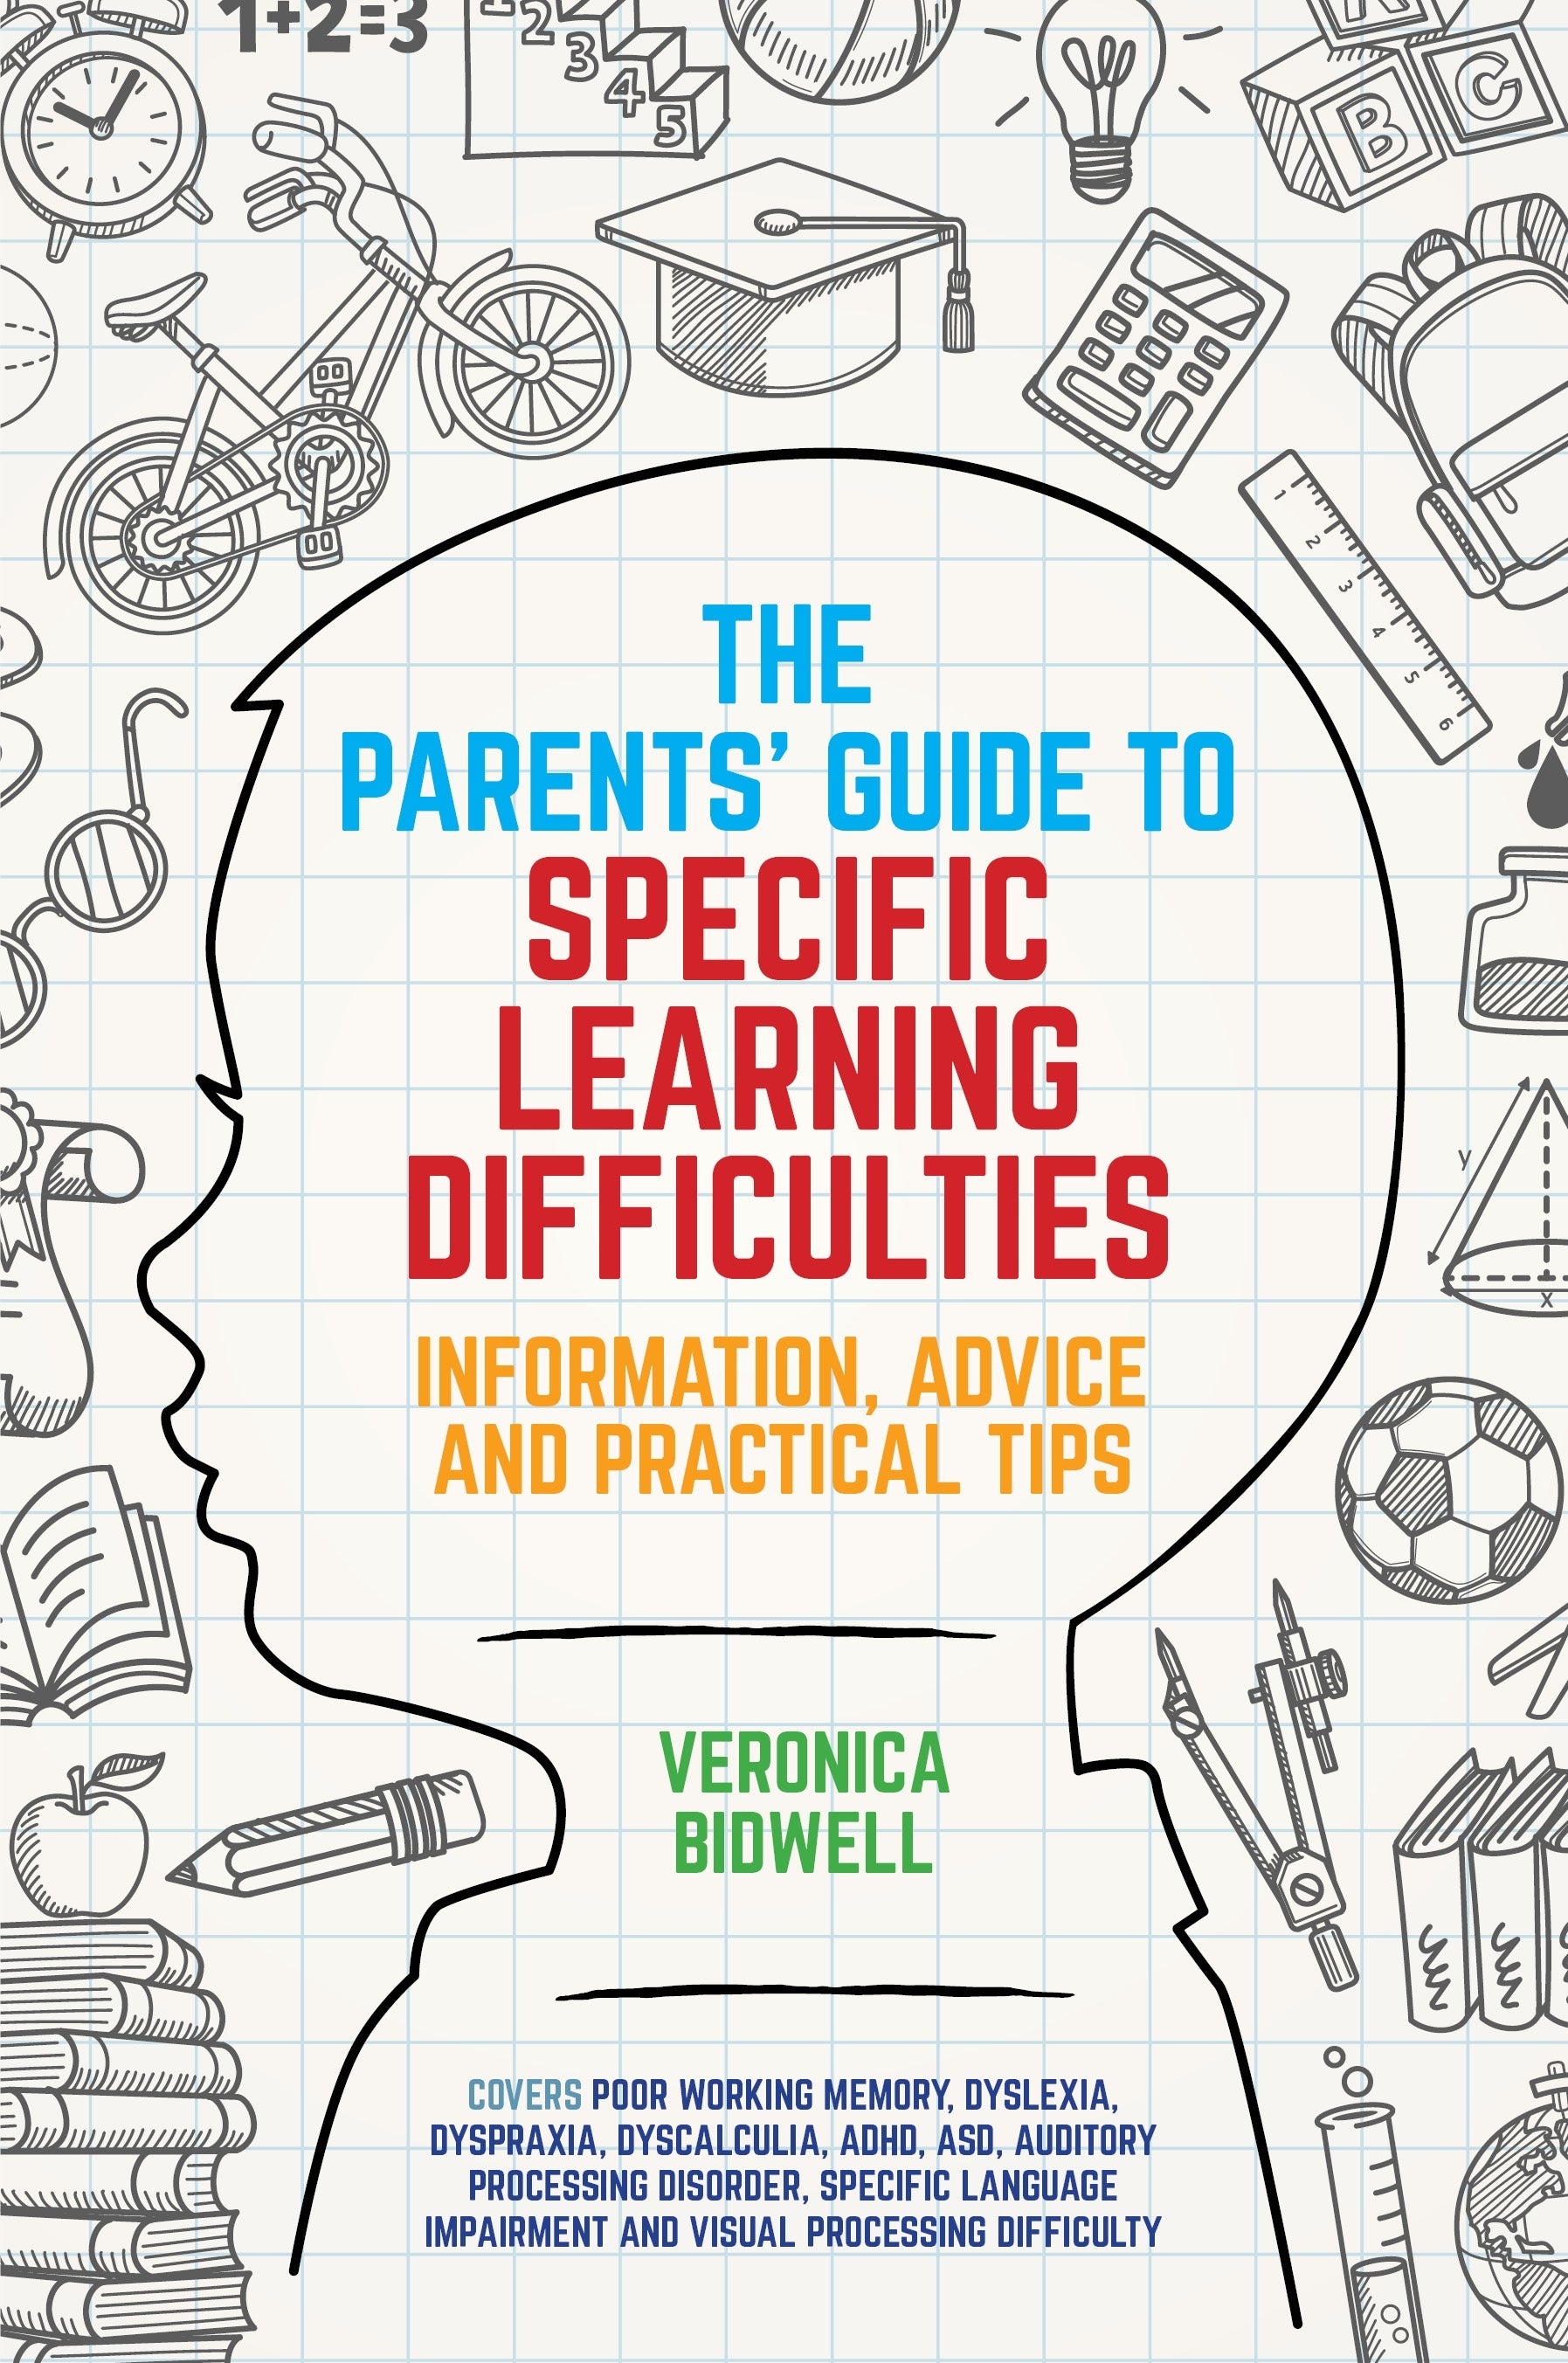 The Parents' Guide to Specific Learning Difficulties by Veronica Bidwell